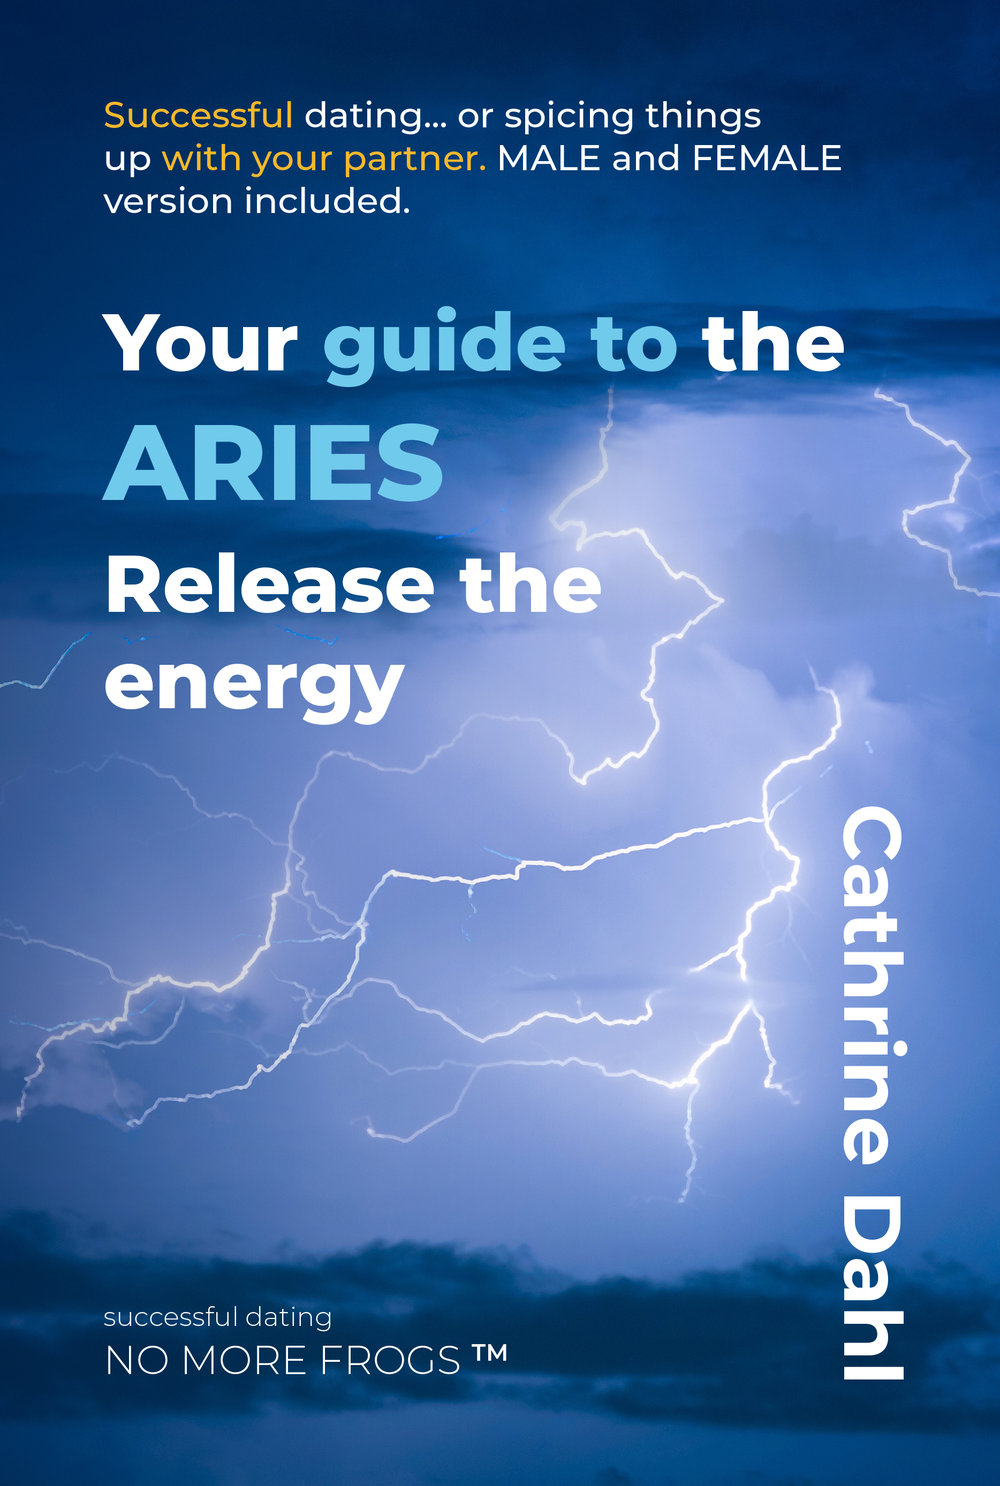 Aries - Rediscover your partner - Release the Energy (Copy)